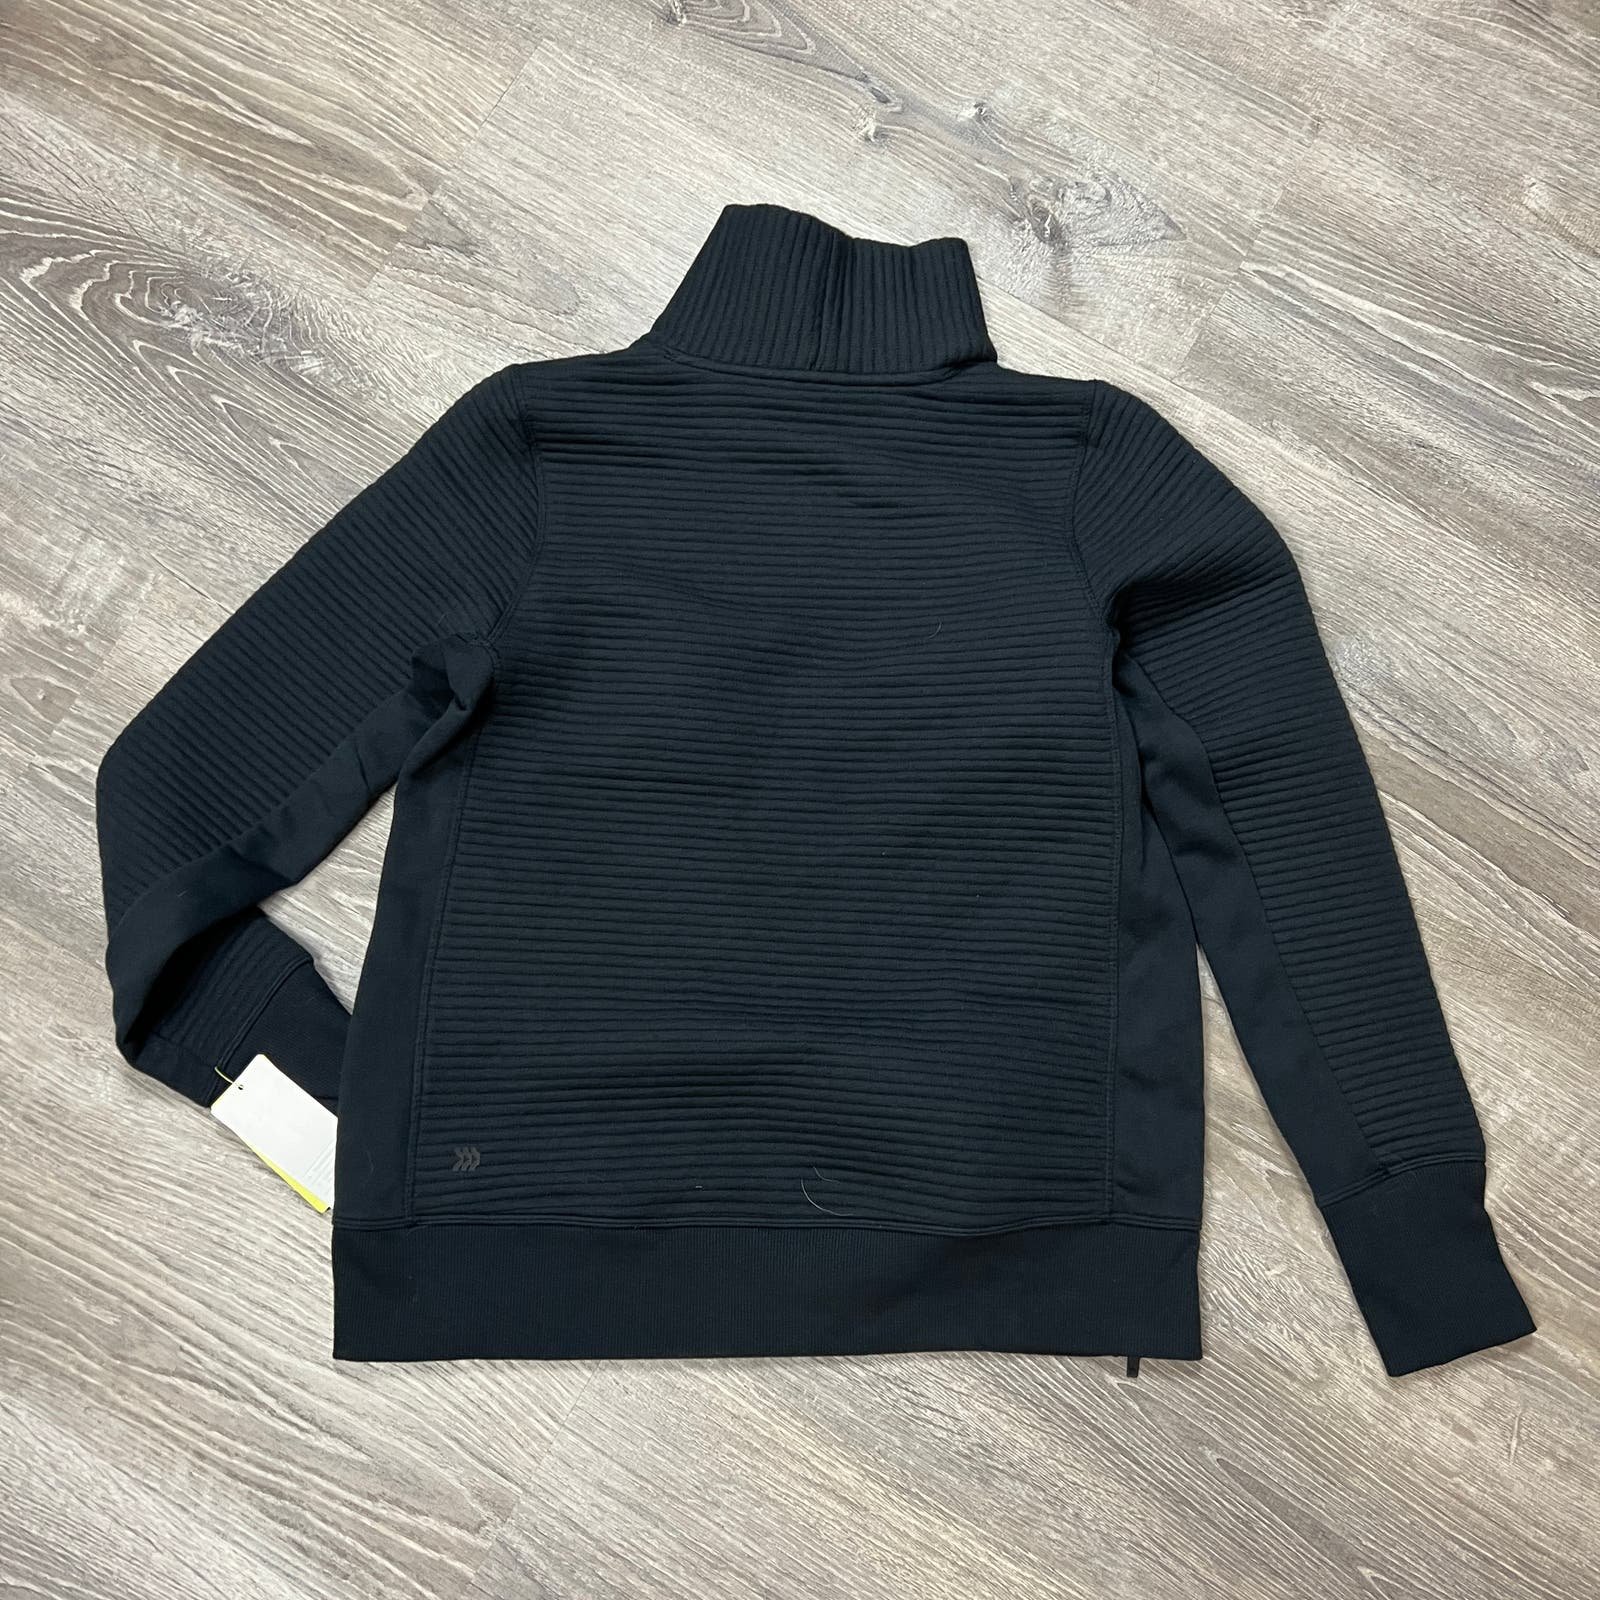 reasonable price All in Motion Women´s Black Quilted Pullover Sweatshirt - Size XS - NWT IP2h25bpT Online Exclusive